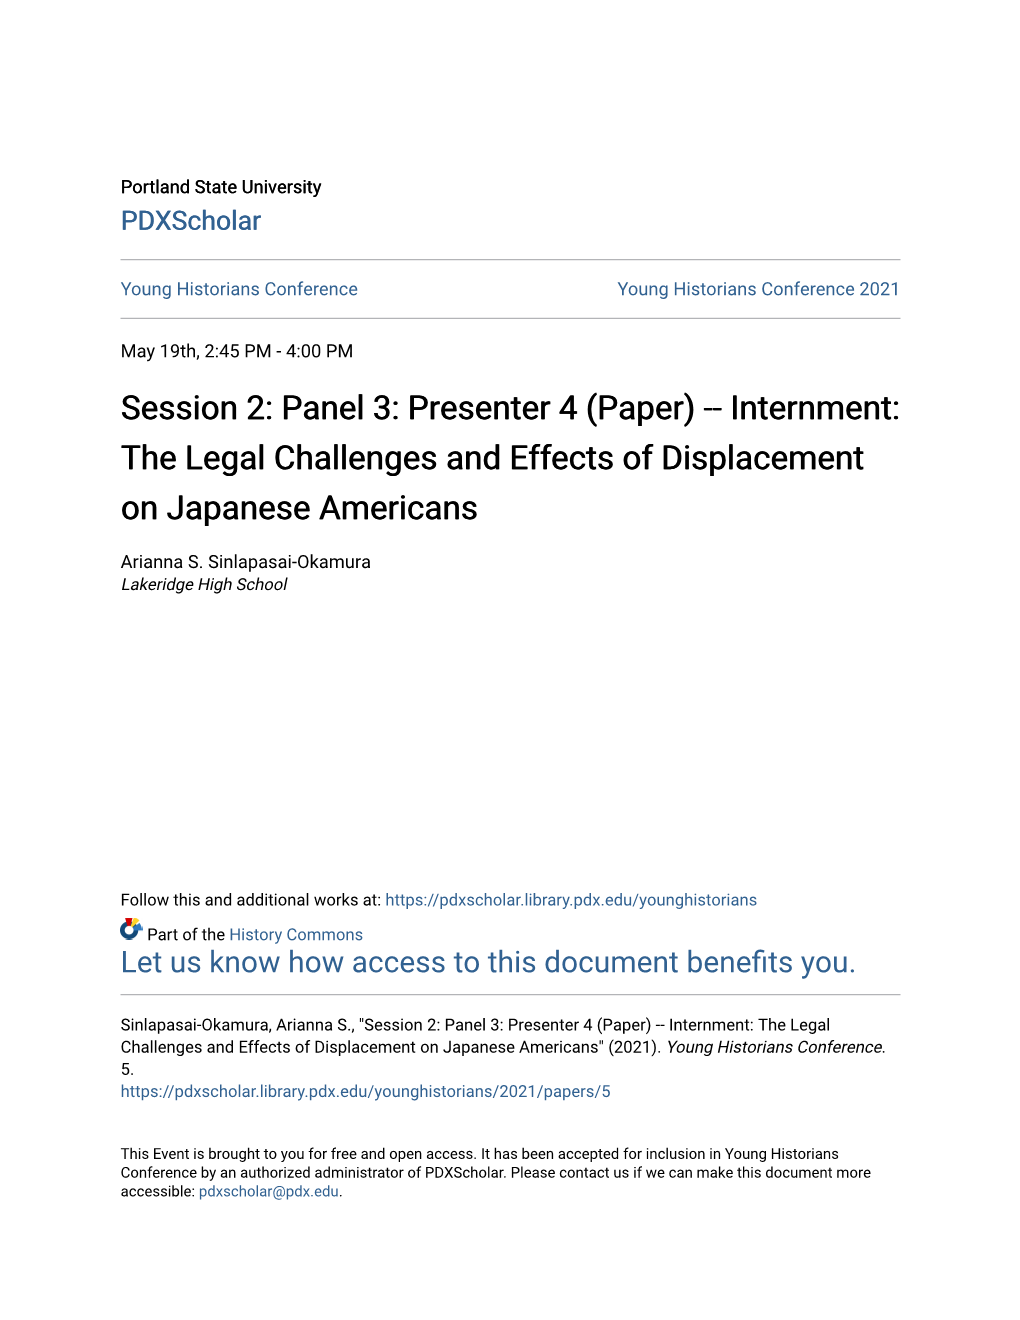 Session 2: Panel 3: Presenter 4 (Paper) -- Internment: the Legal Challenges and Effects of Displacement on Japanese Americans